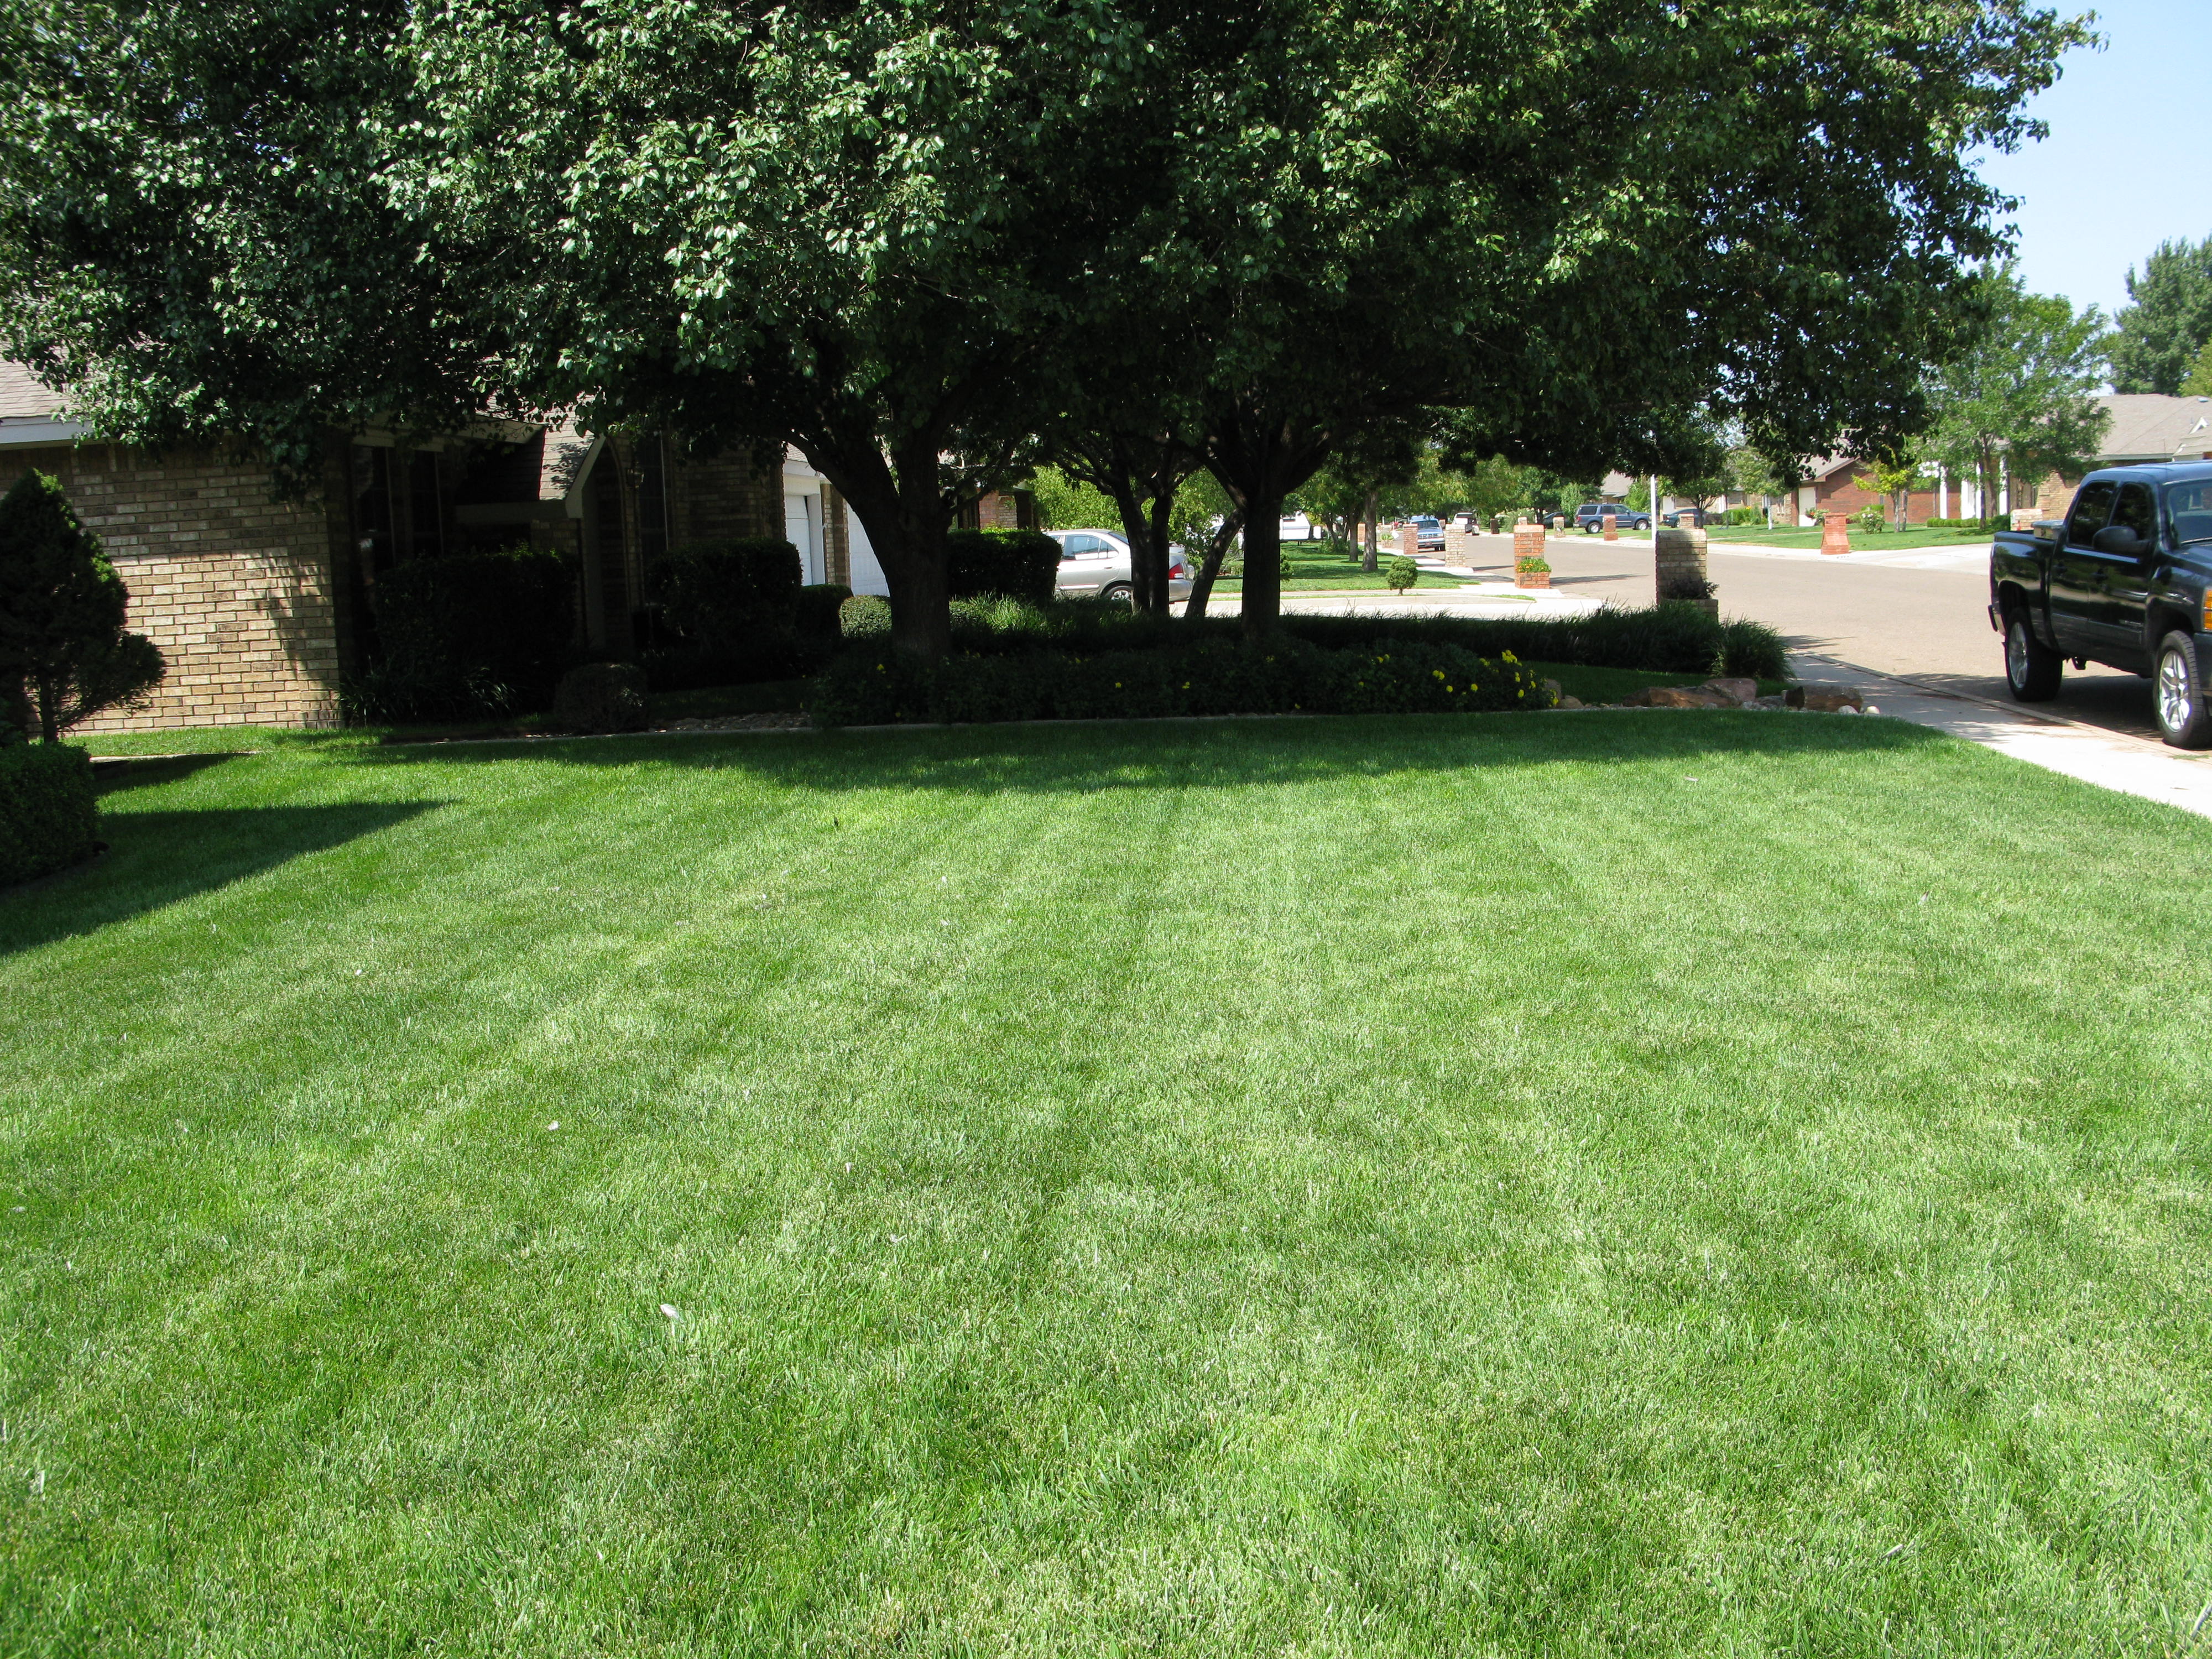 Project Turf & Grass for your home